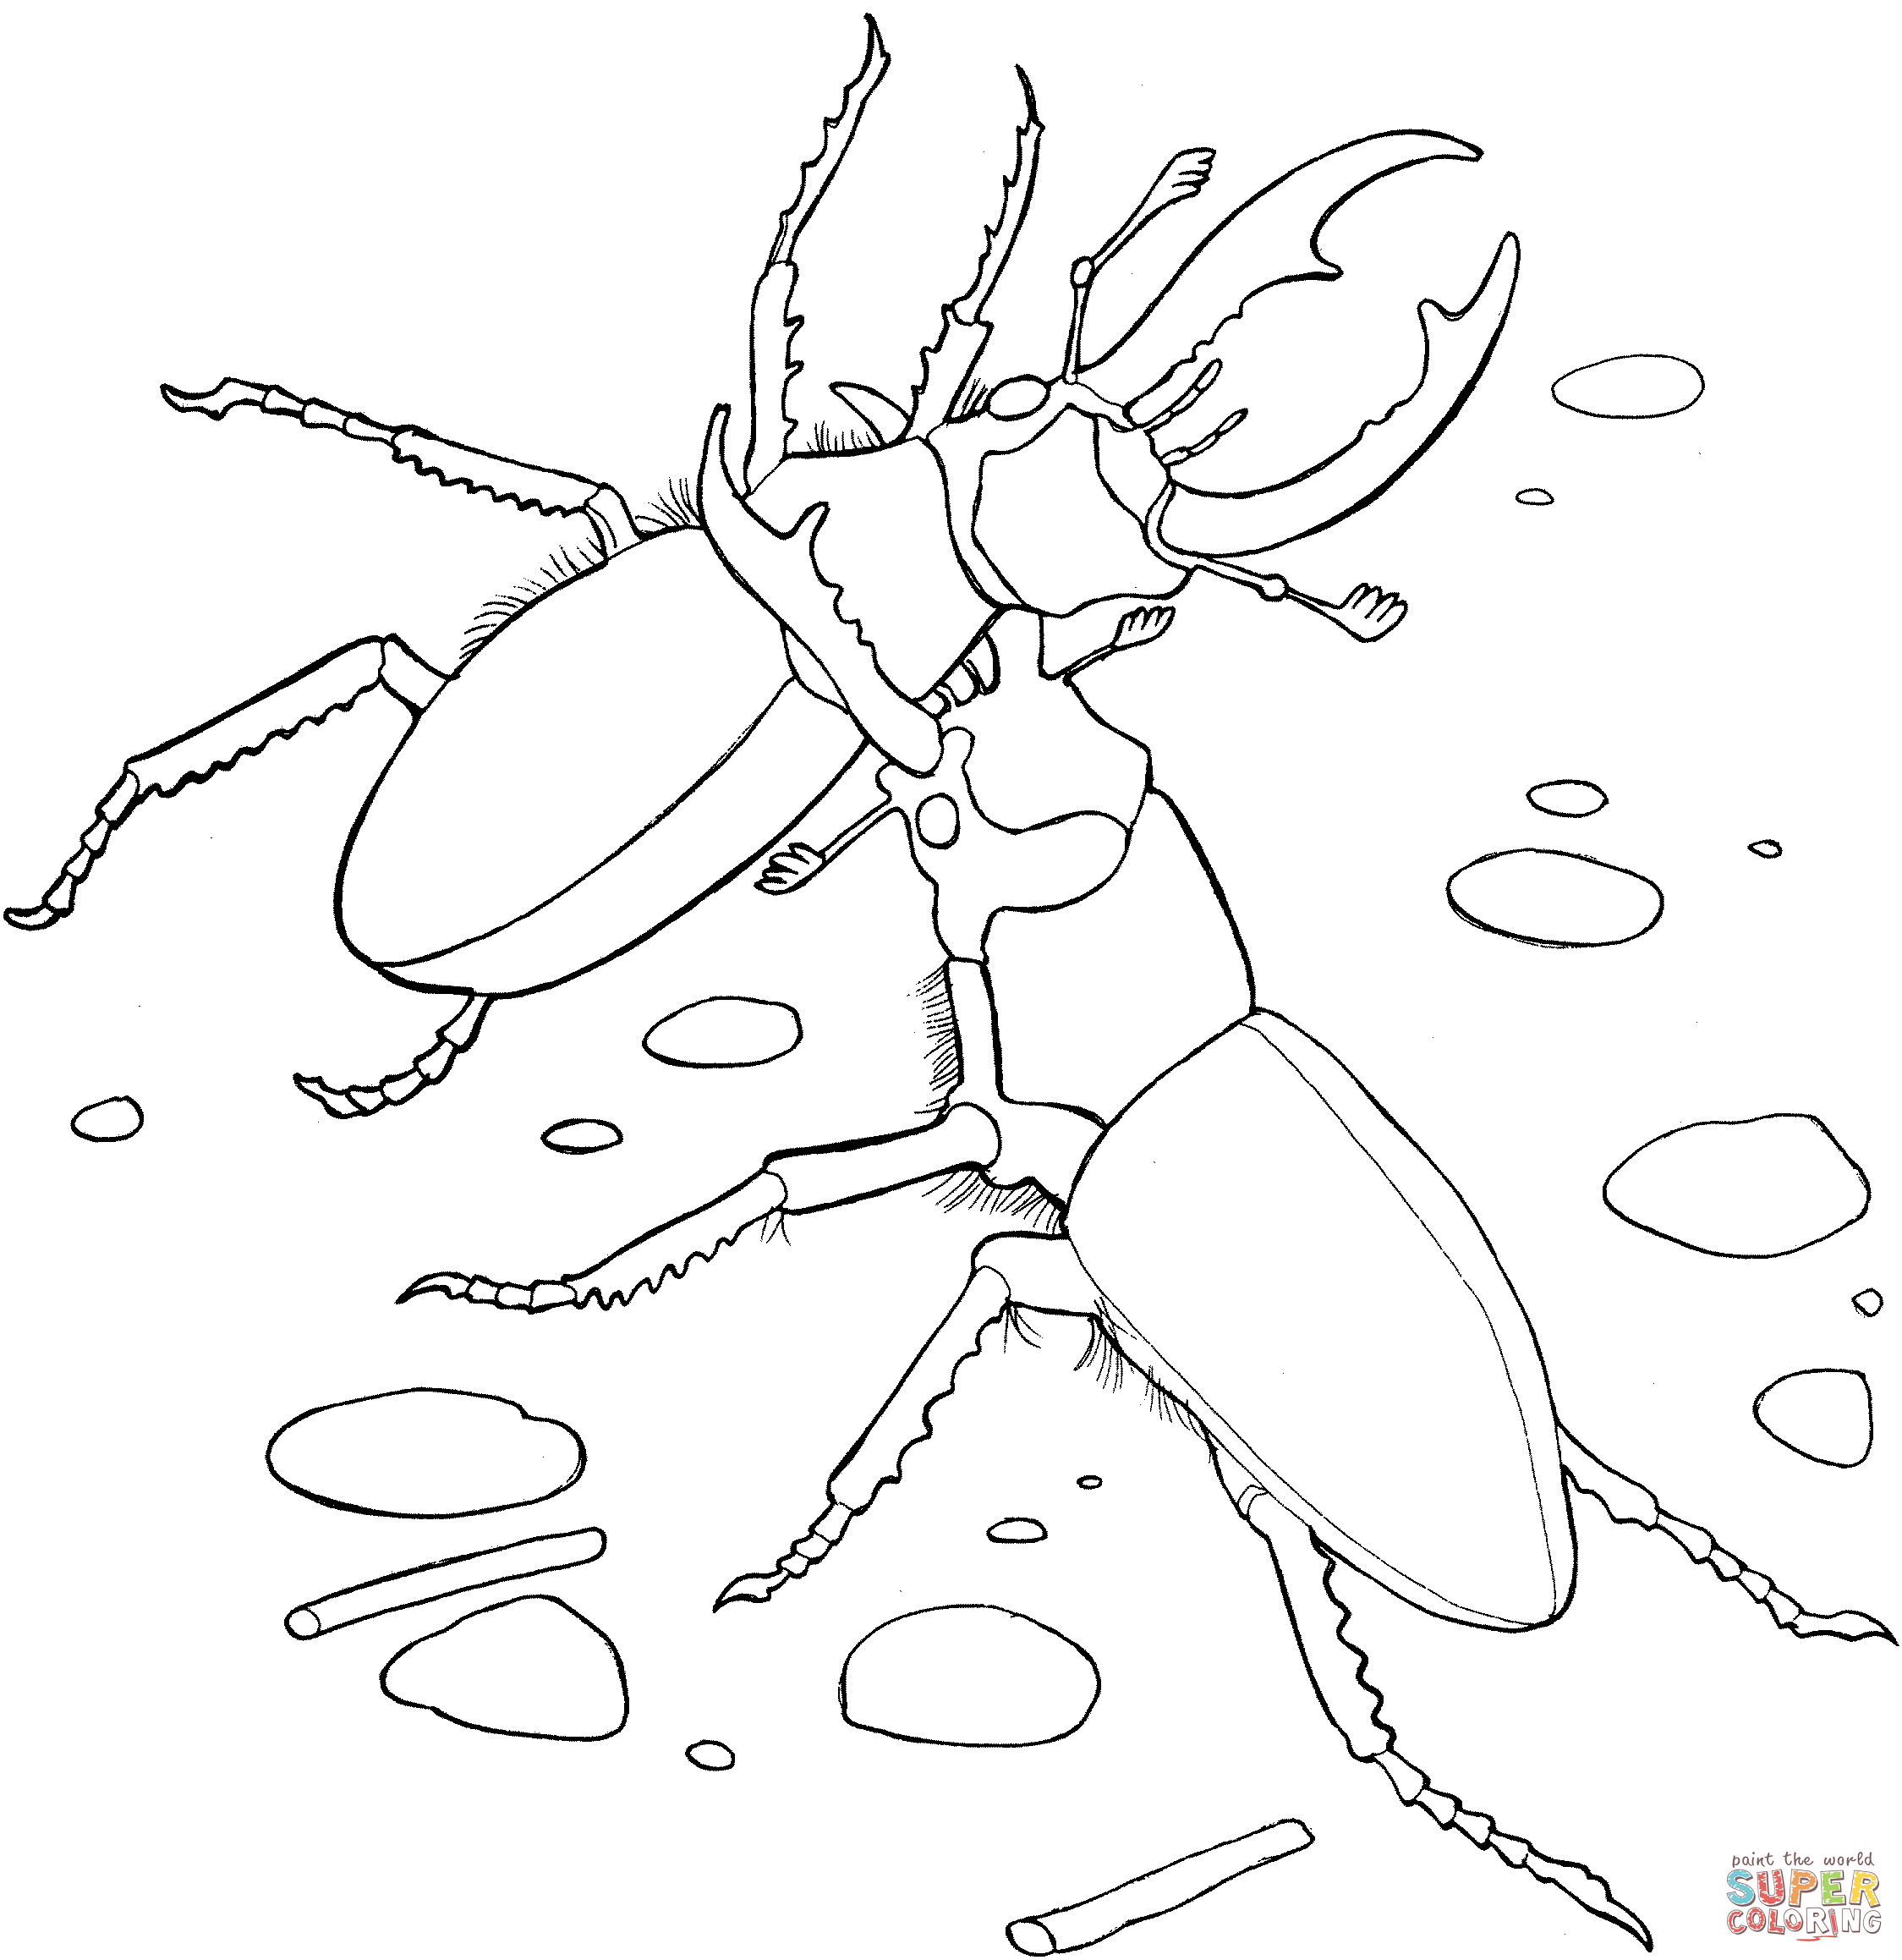 Stag Beetle coloring #15, Download drawings